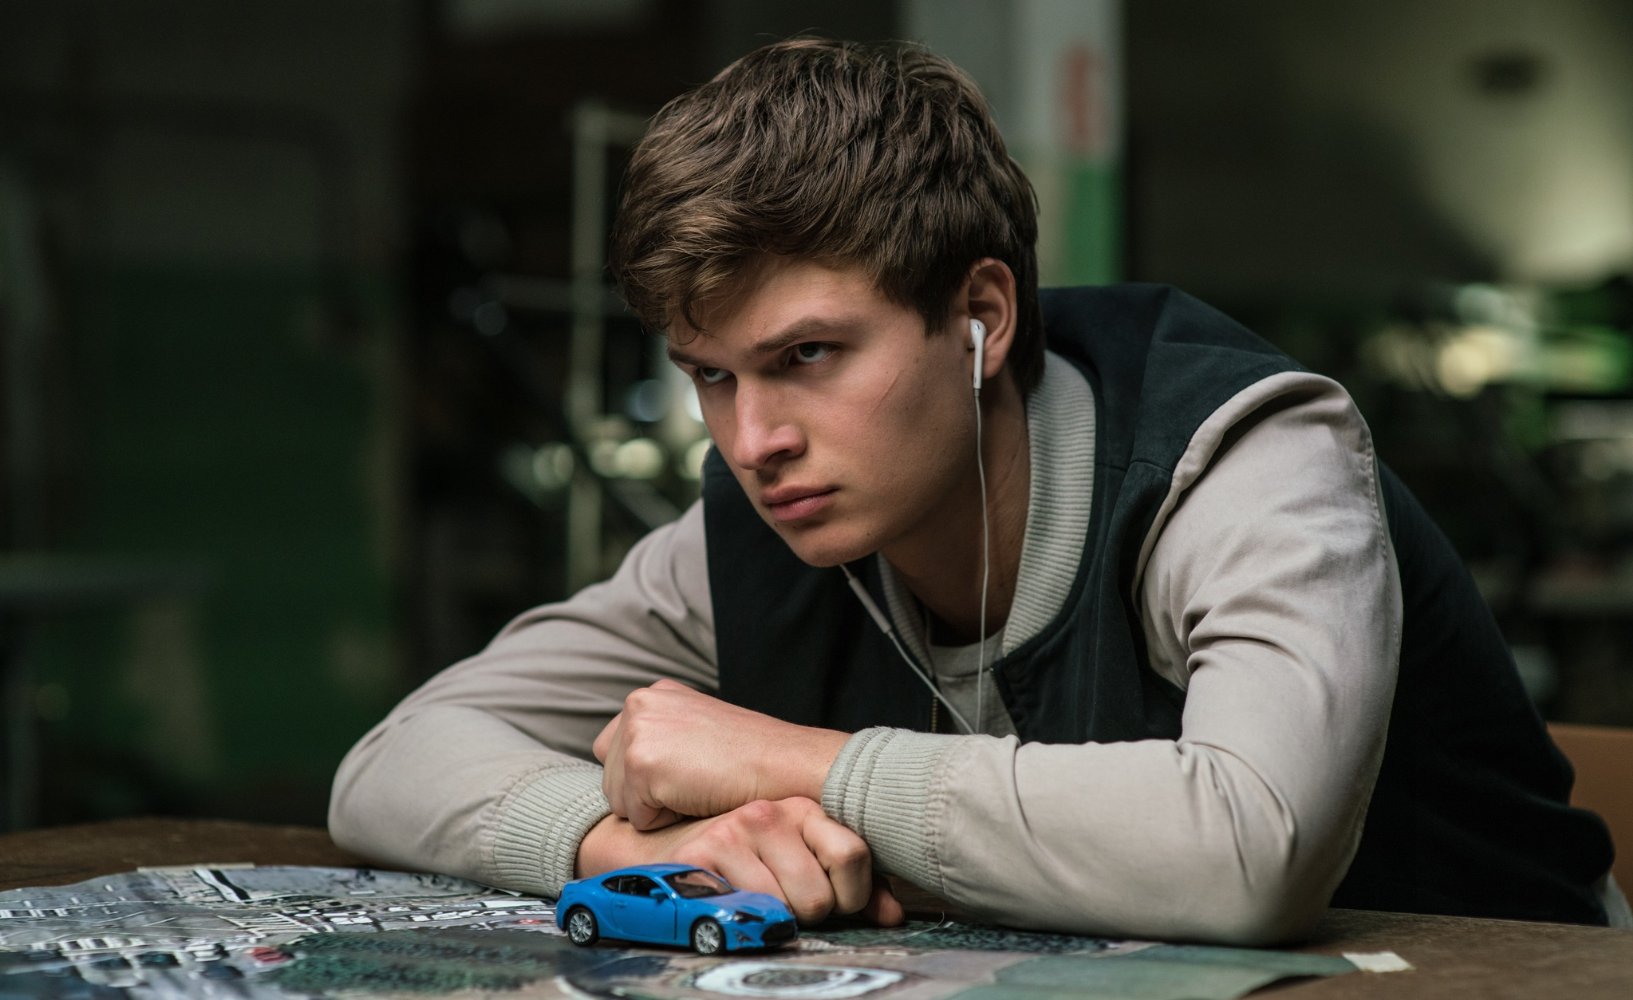 Who is Ansel Elgort? Baby Driver actor and musician who starred in The  Divergent Series and Carrie